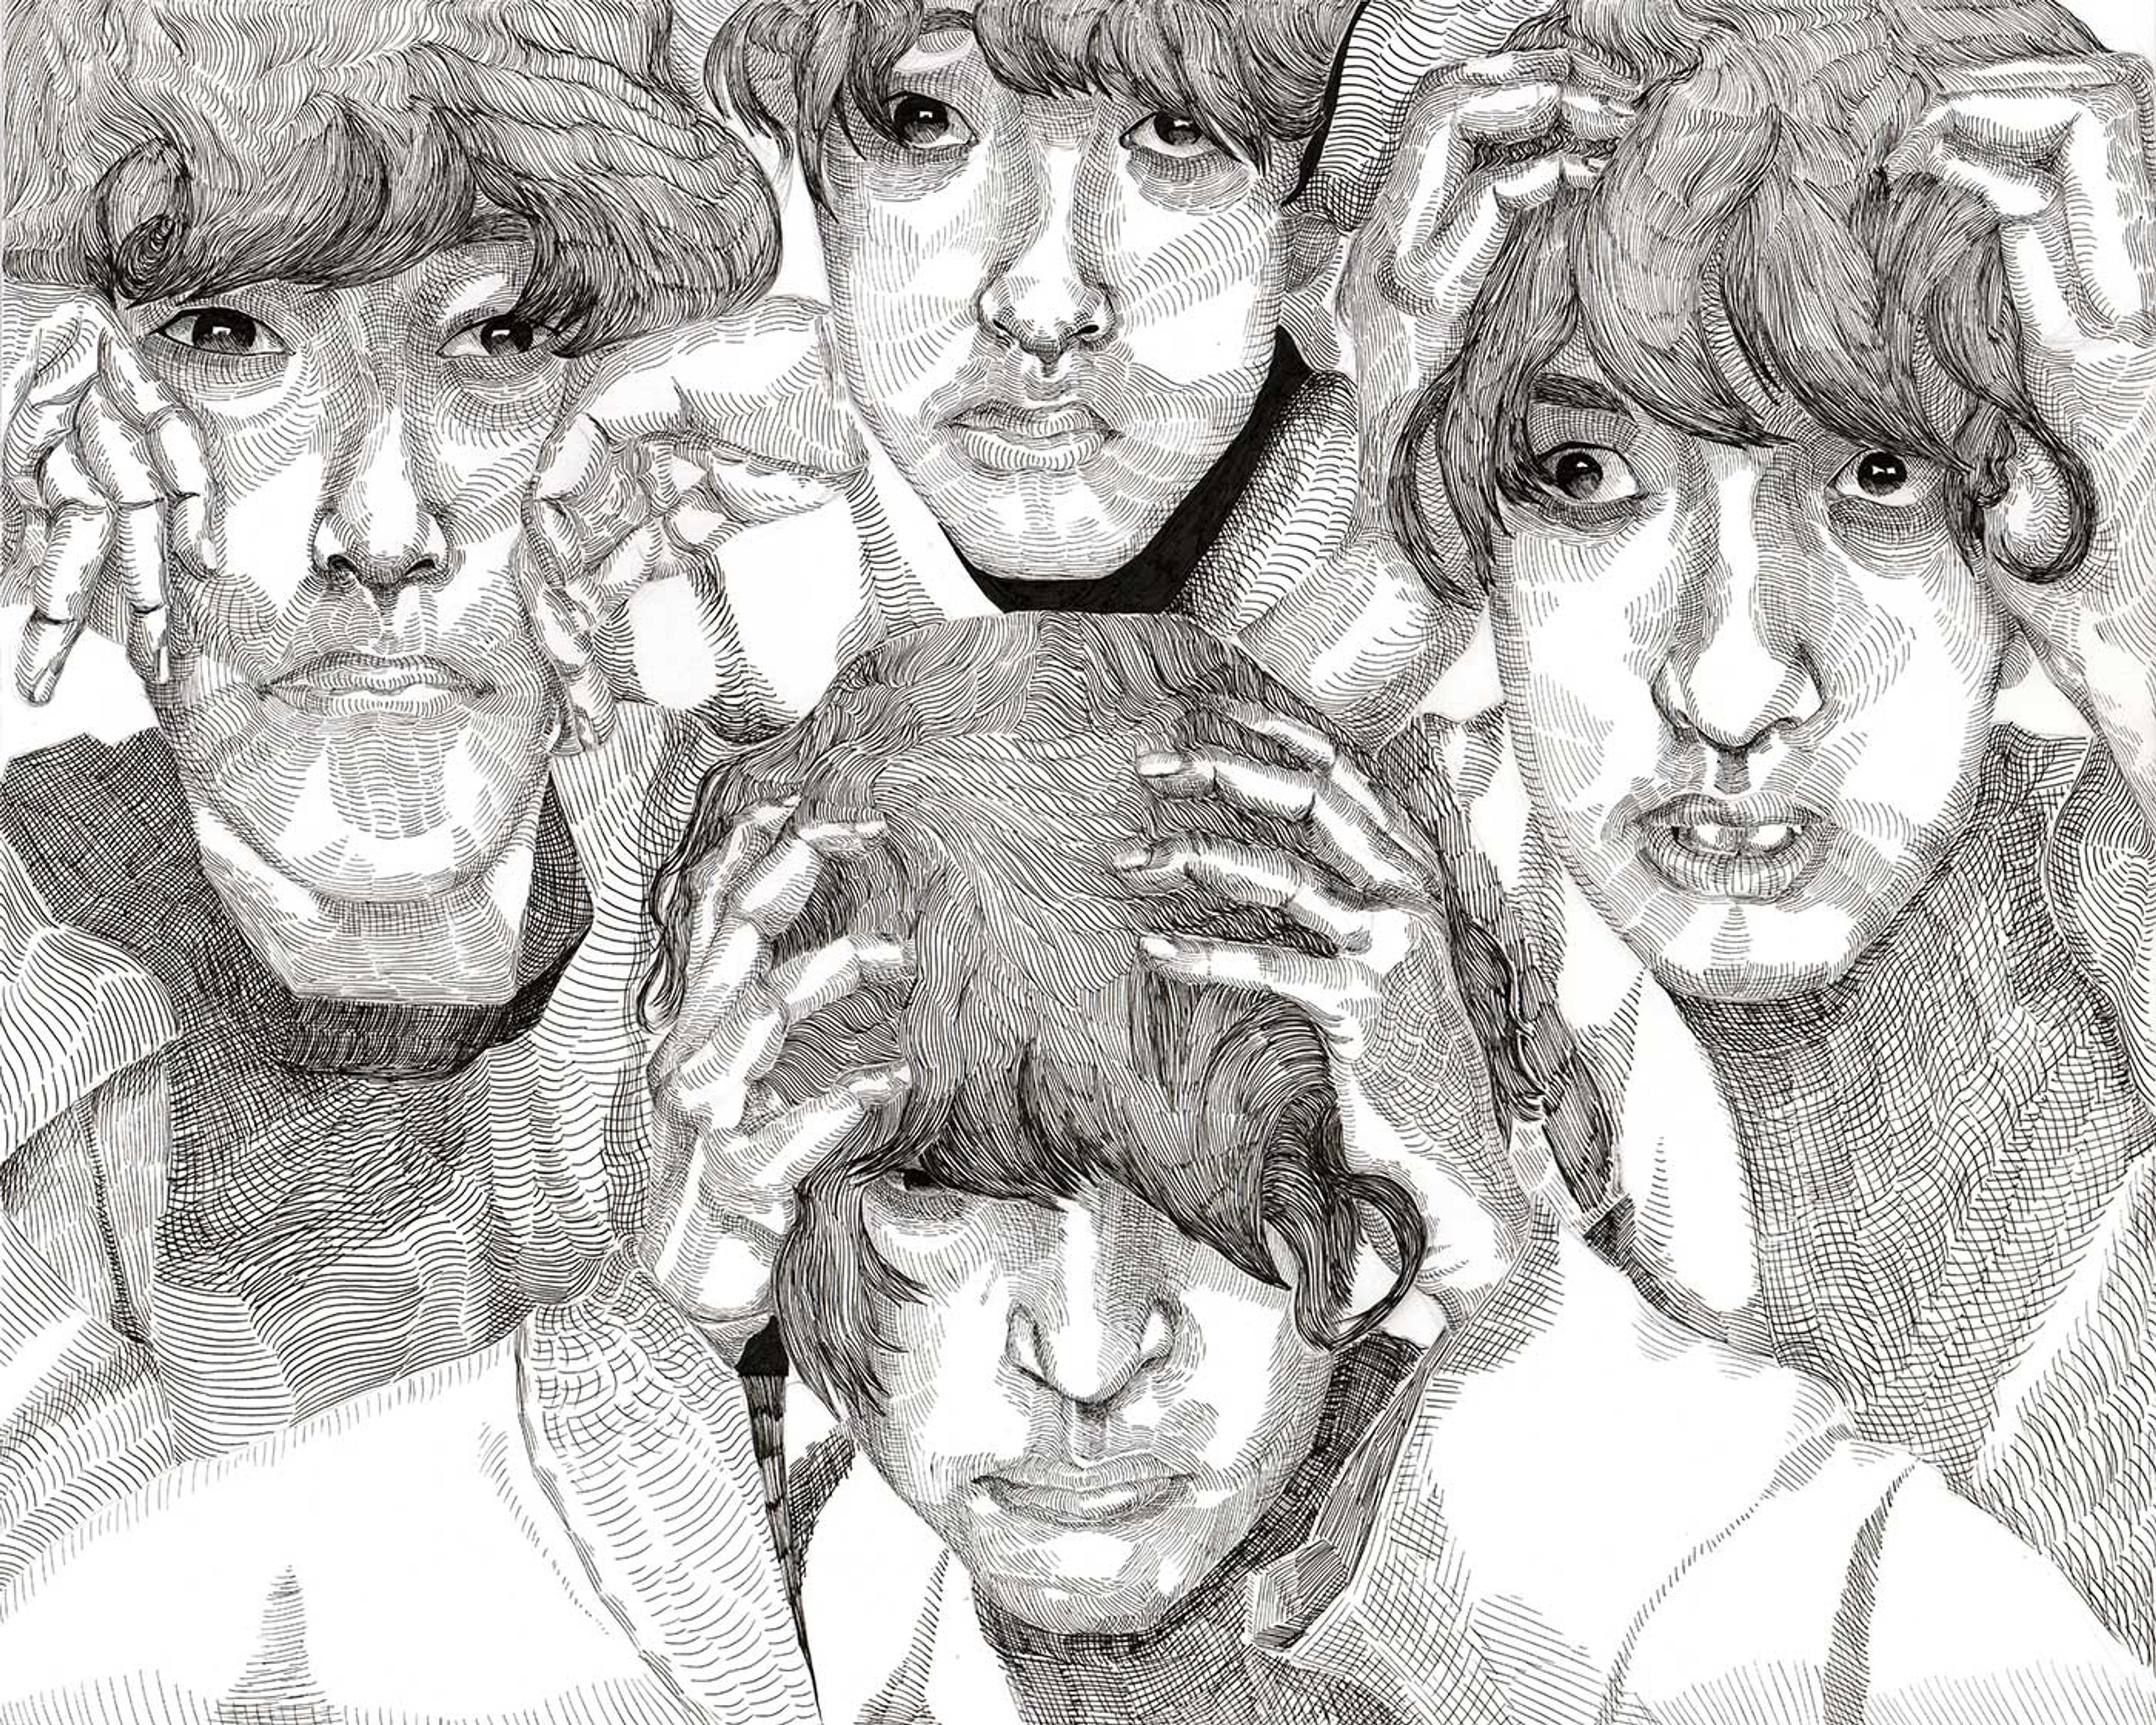 Pencil drawing of four faces looking distressed or worried.